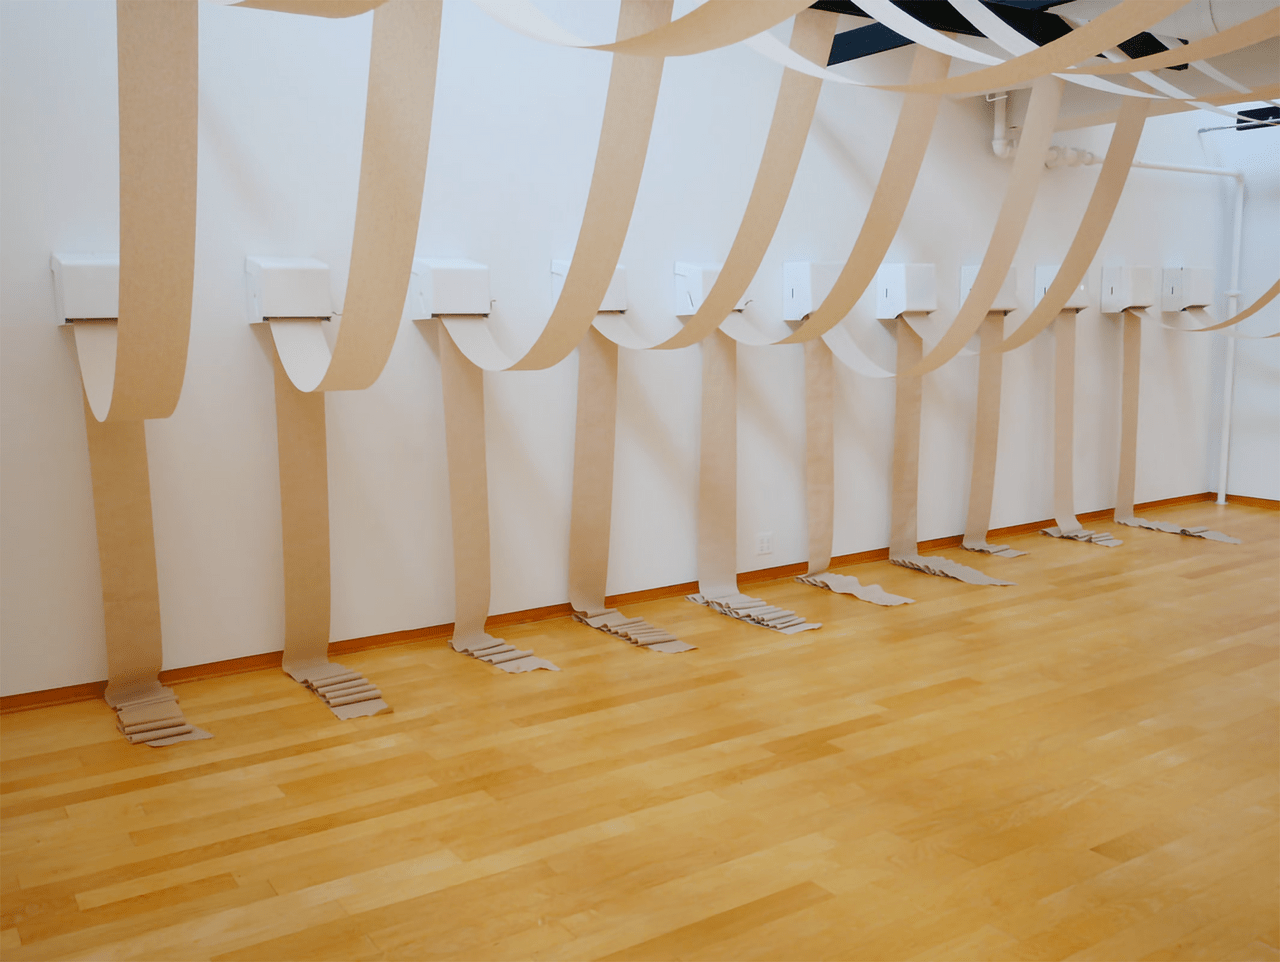 An image of a gallery consisting of paper towel dispensers tethered via their paper.